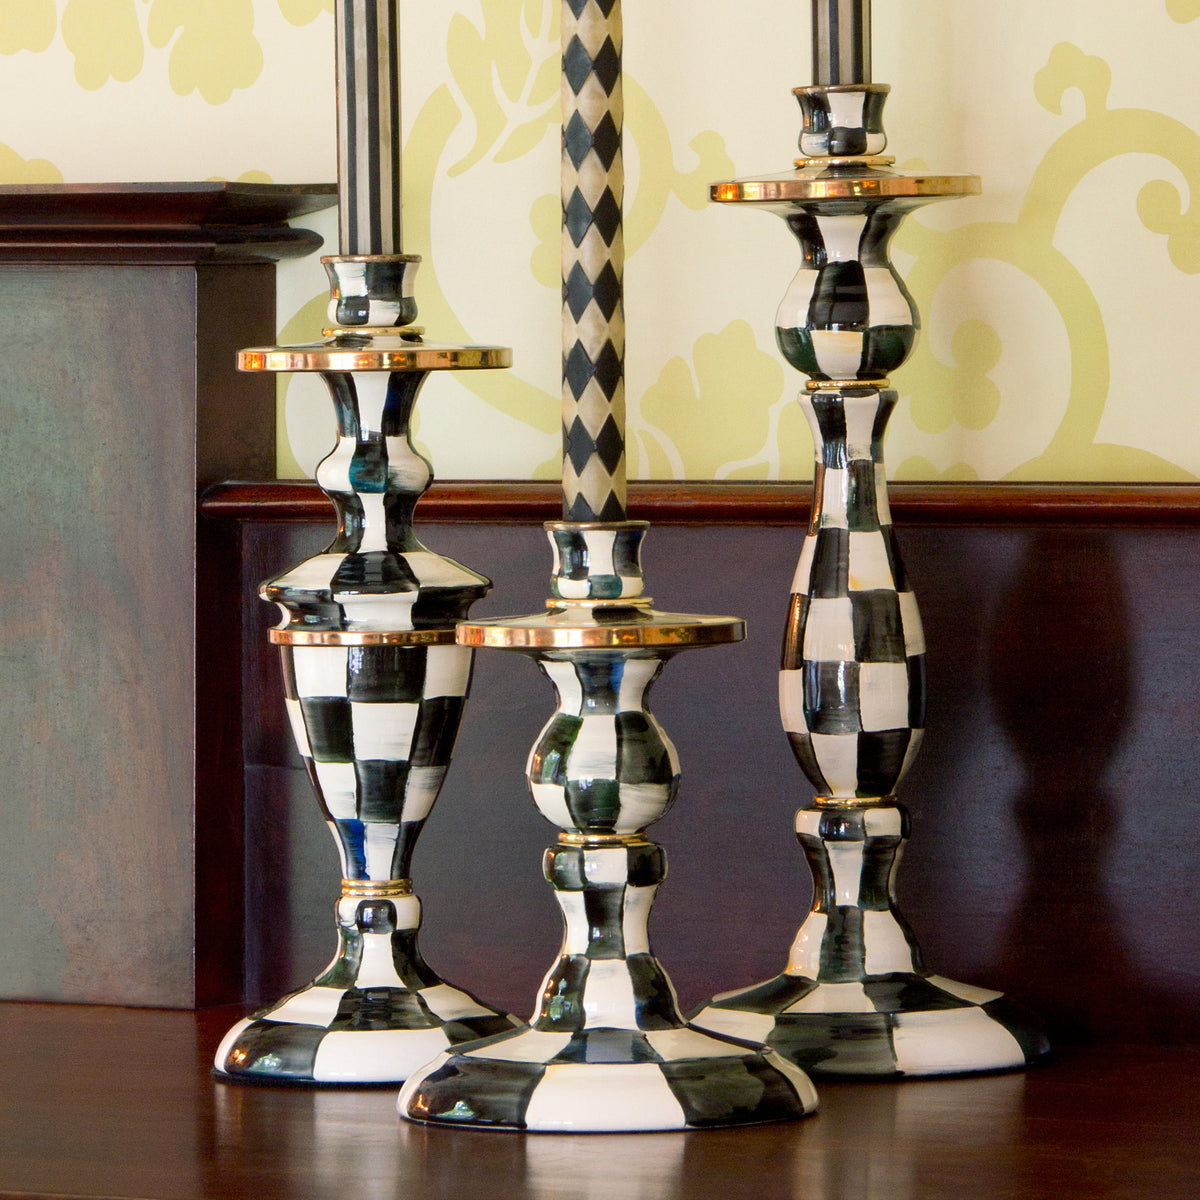 Courtly Check Enamel Candlestick - Small